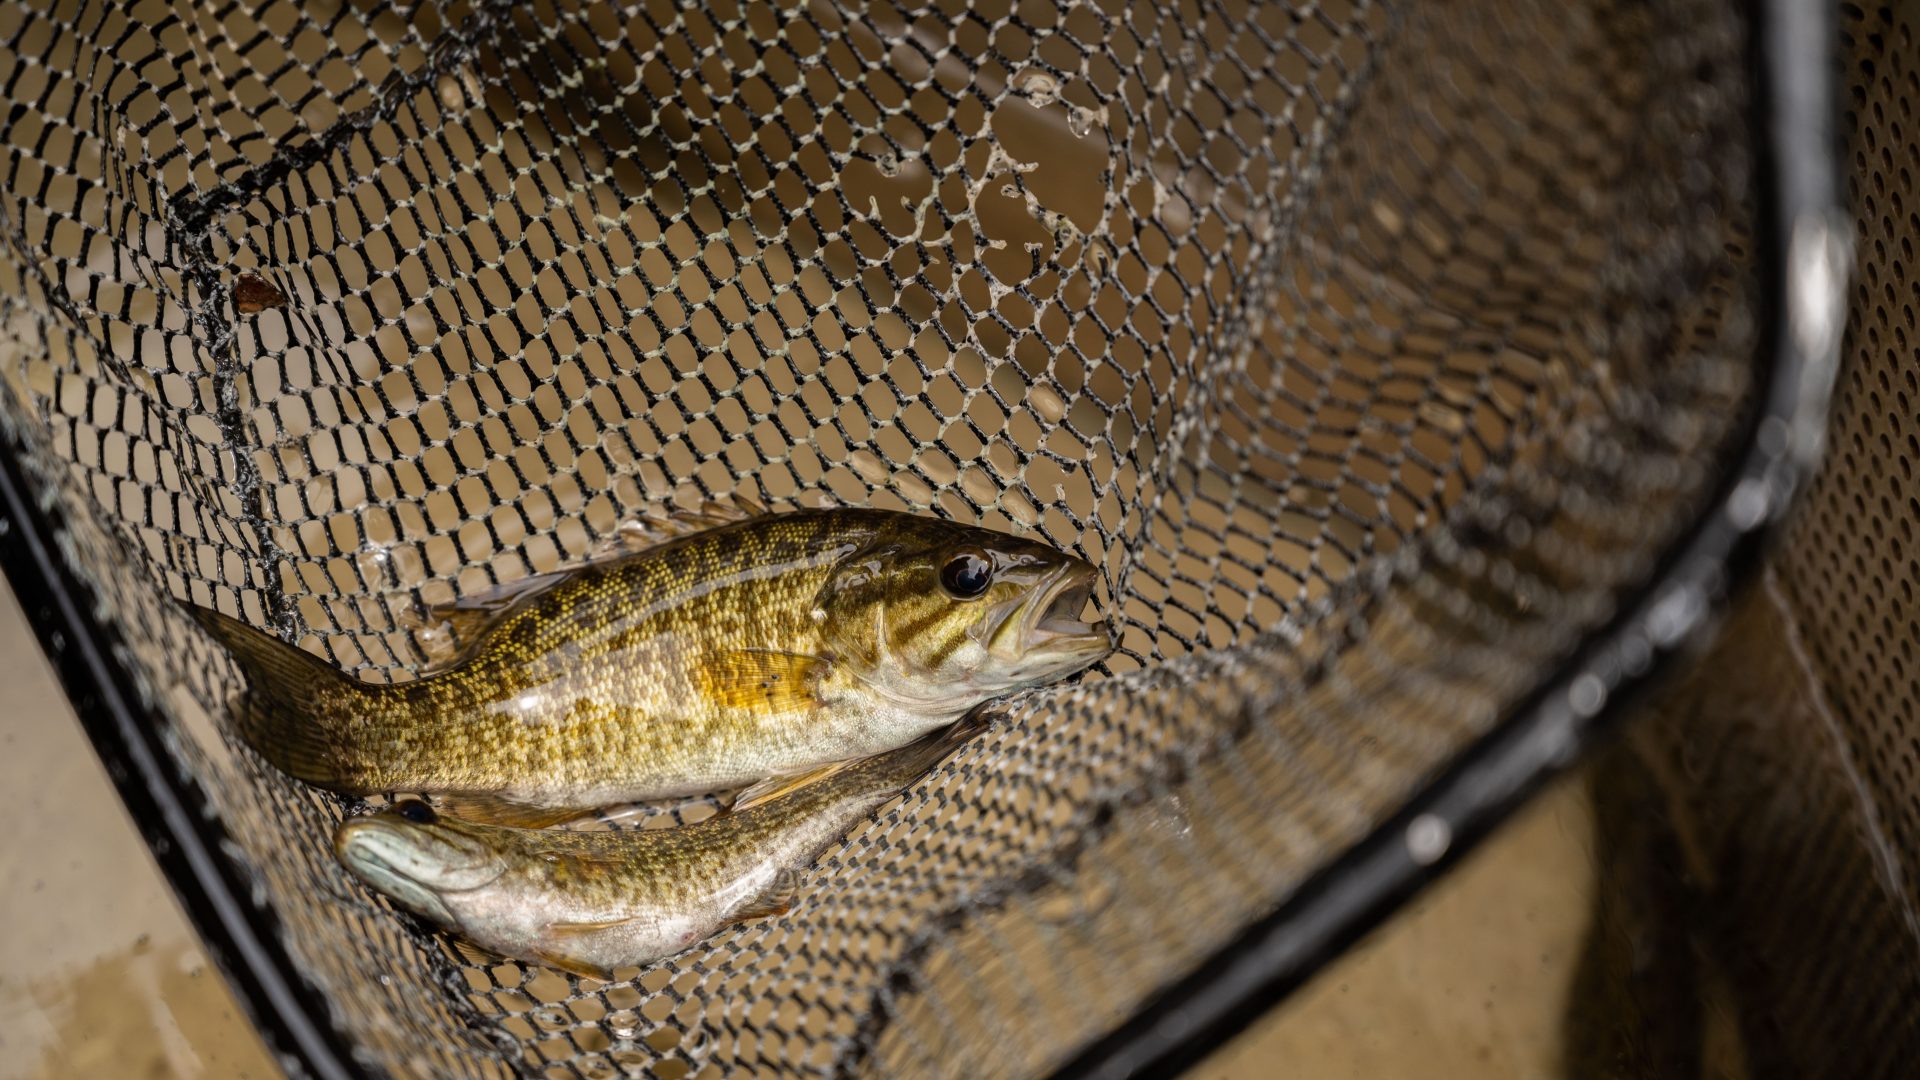 WVDNR highlights water quality improvements, smallmouth bass fishing in  Cheat, Tygart rivers - WVDNR